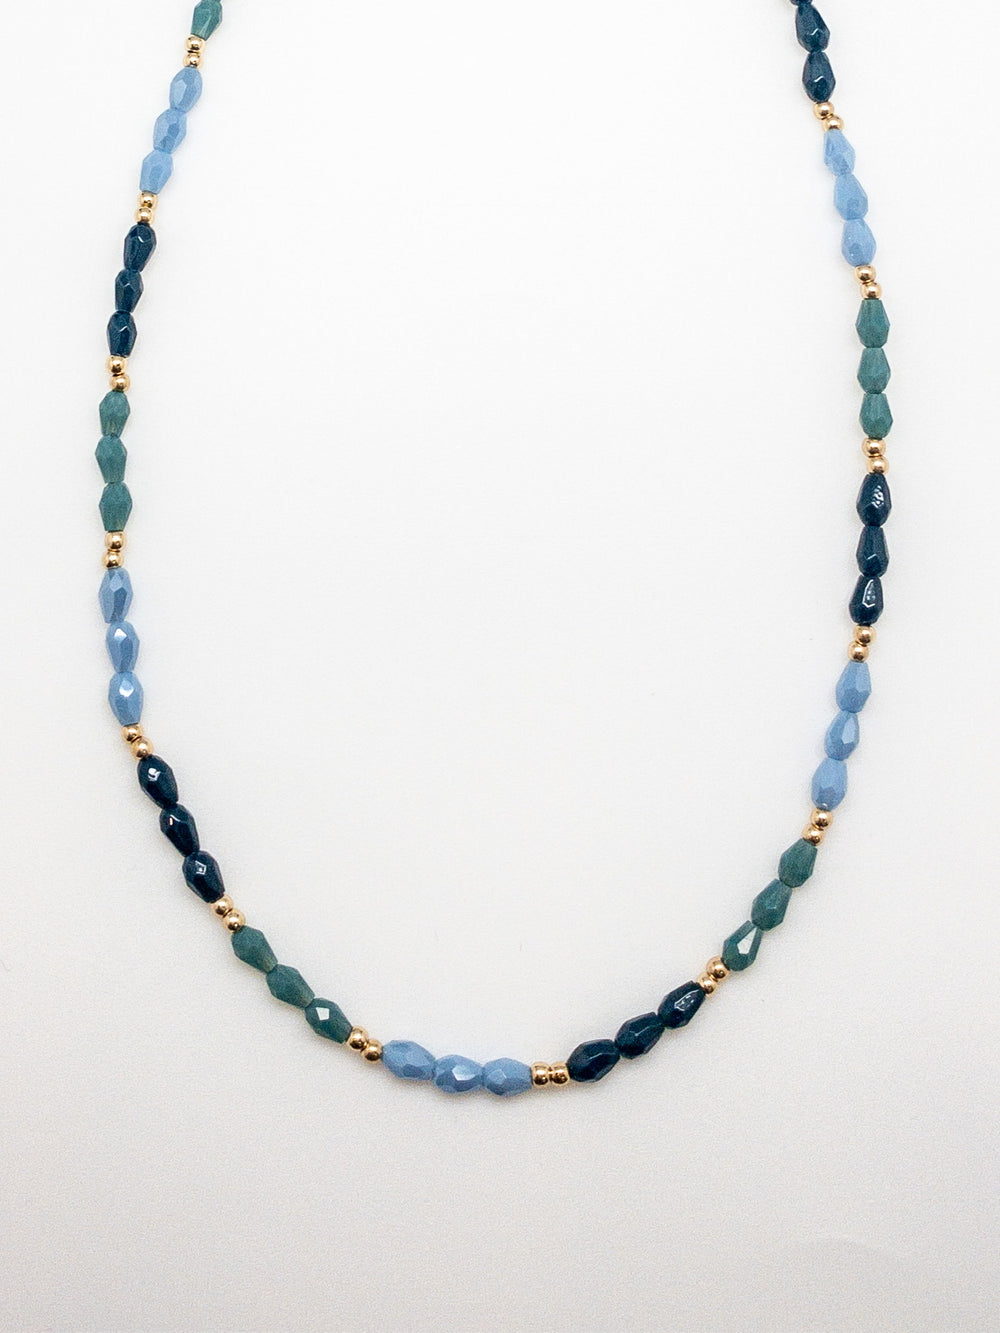 Skylar Beaded Necklace. Blue beads with gold accents.